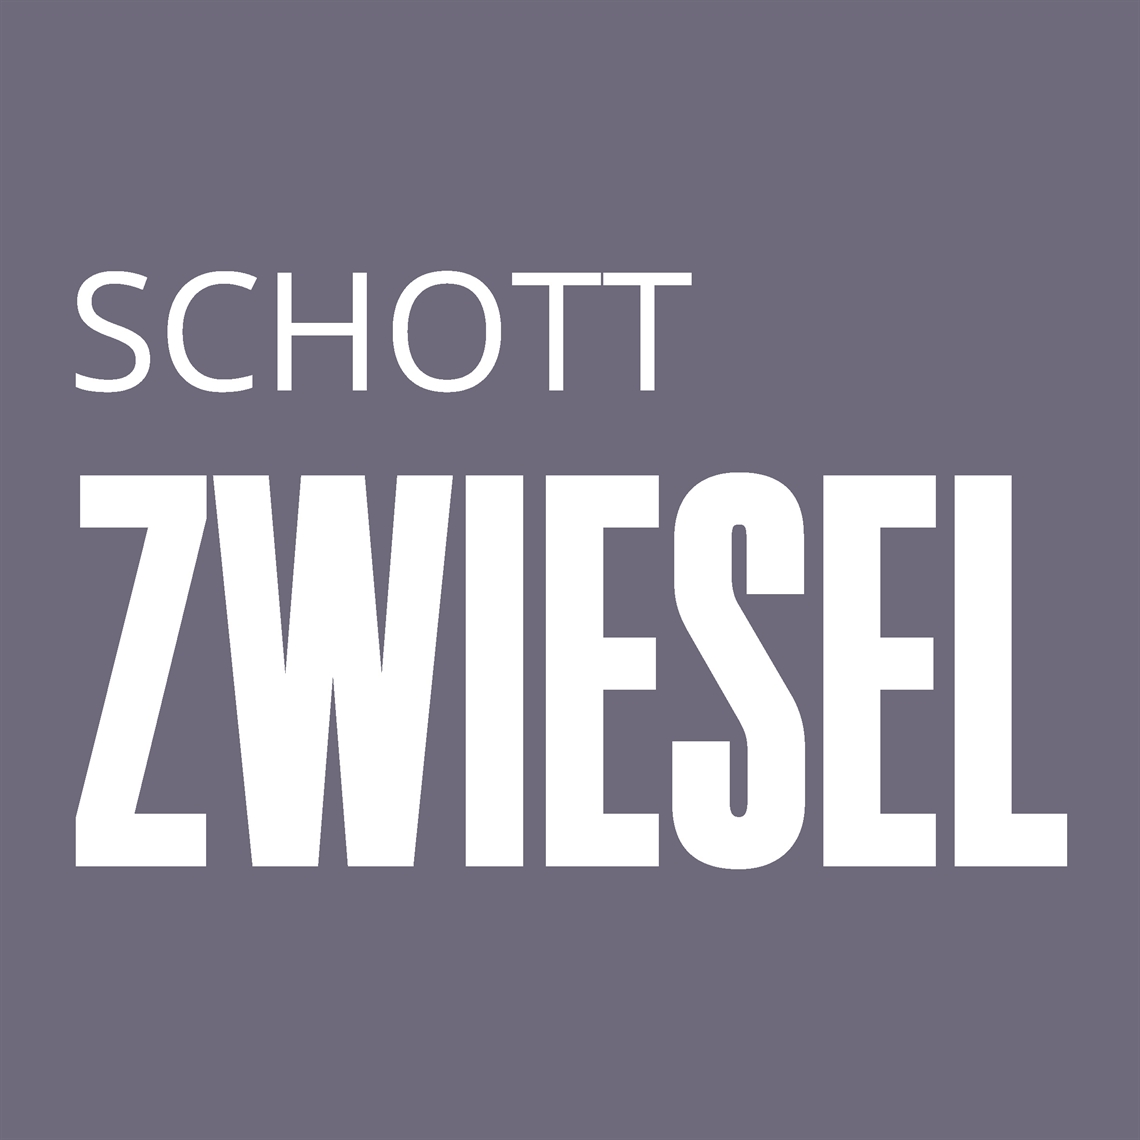 View our collection of Schott Zwiesel Luigi Bormioli